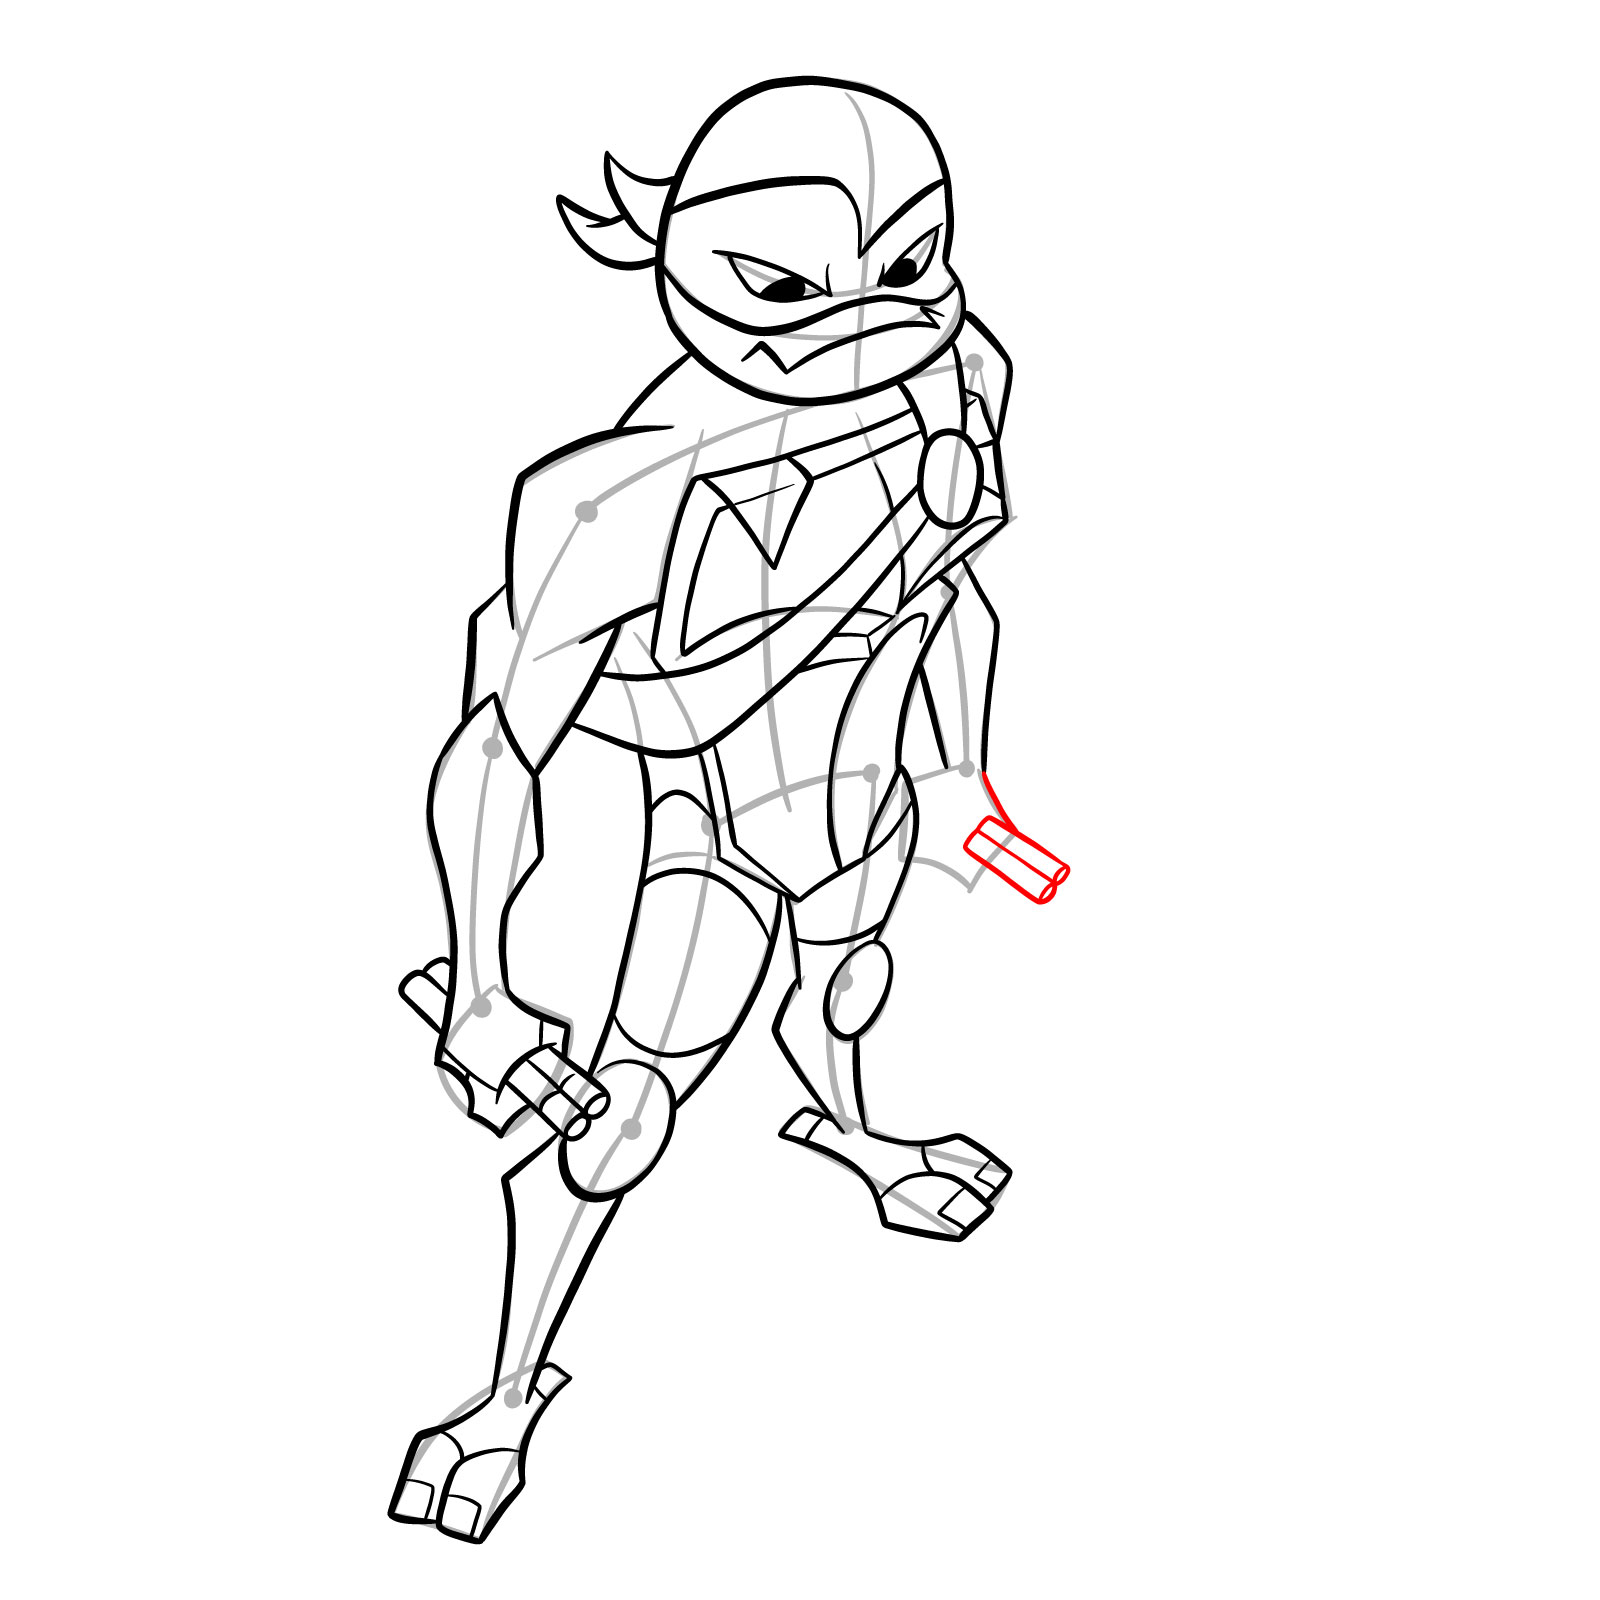 How to draw Mikey in Hamato Ninpō state - step 32